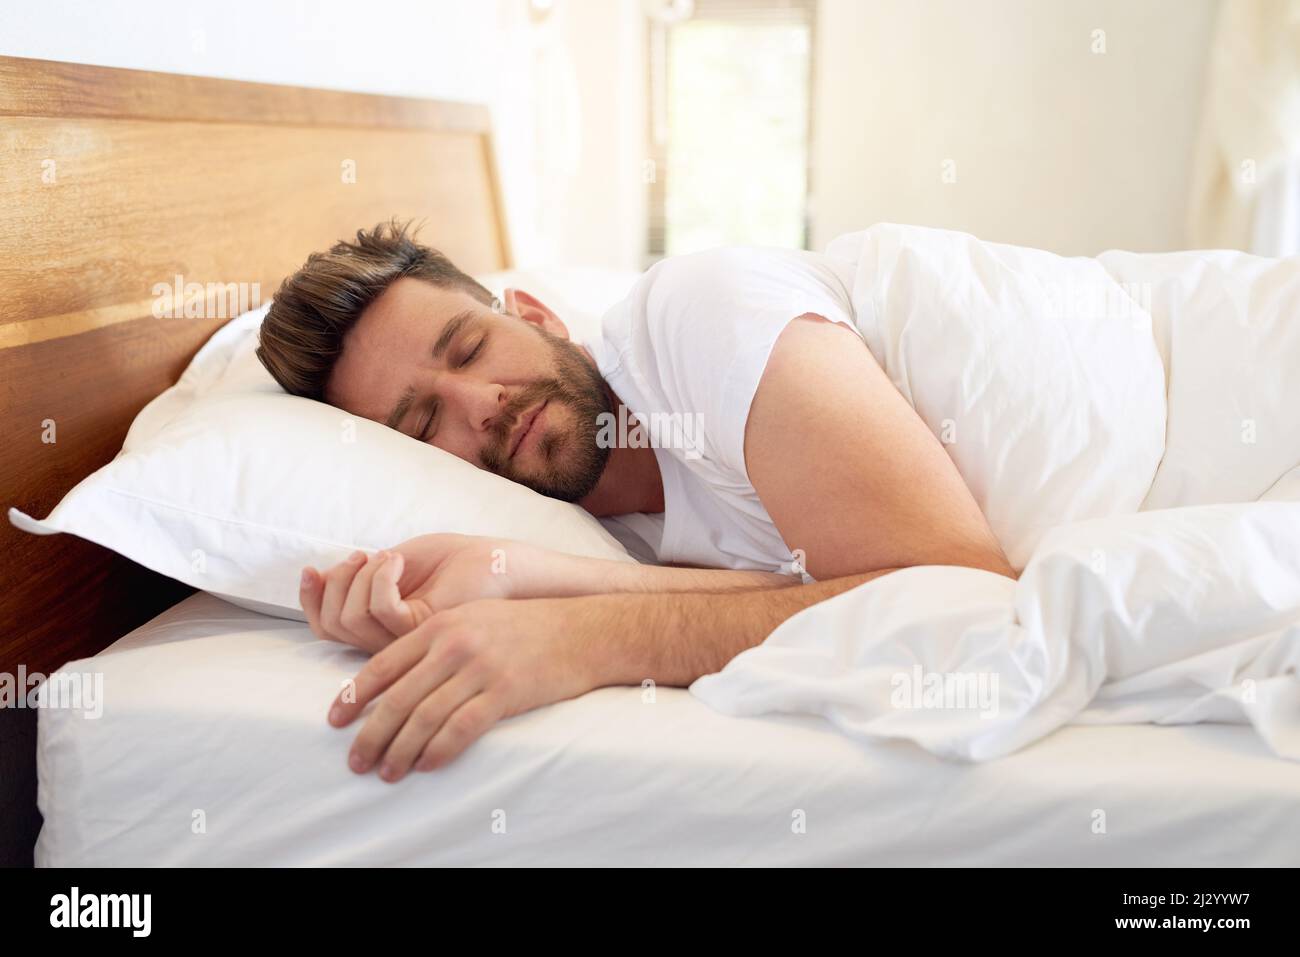 Time to enjoy a weekend lie-in. Cropped shot of a young man sleeping peacefully in bed at home. Stock Photo